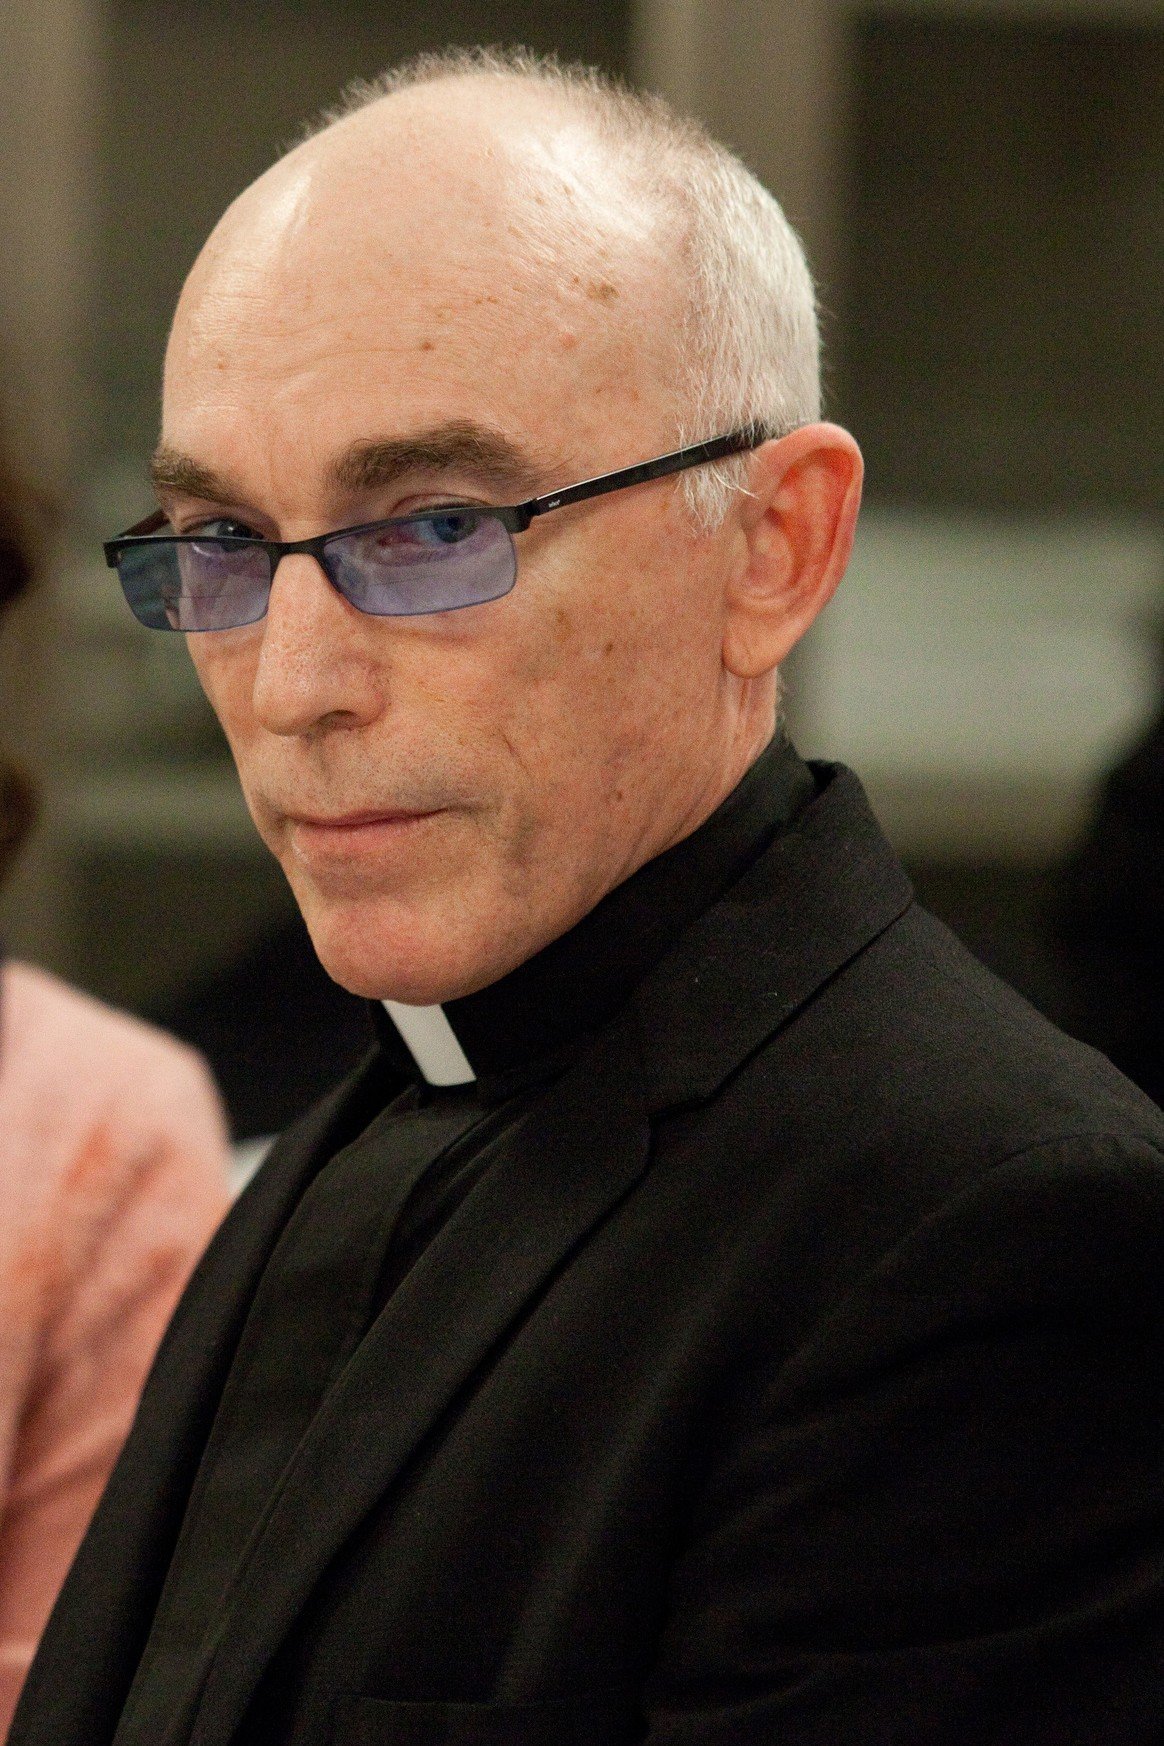 Jackie Earle Haley stars as Father Oscar Huber in Exclusive Releasing's Parkland (2013)